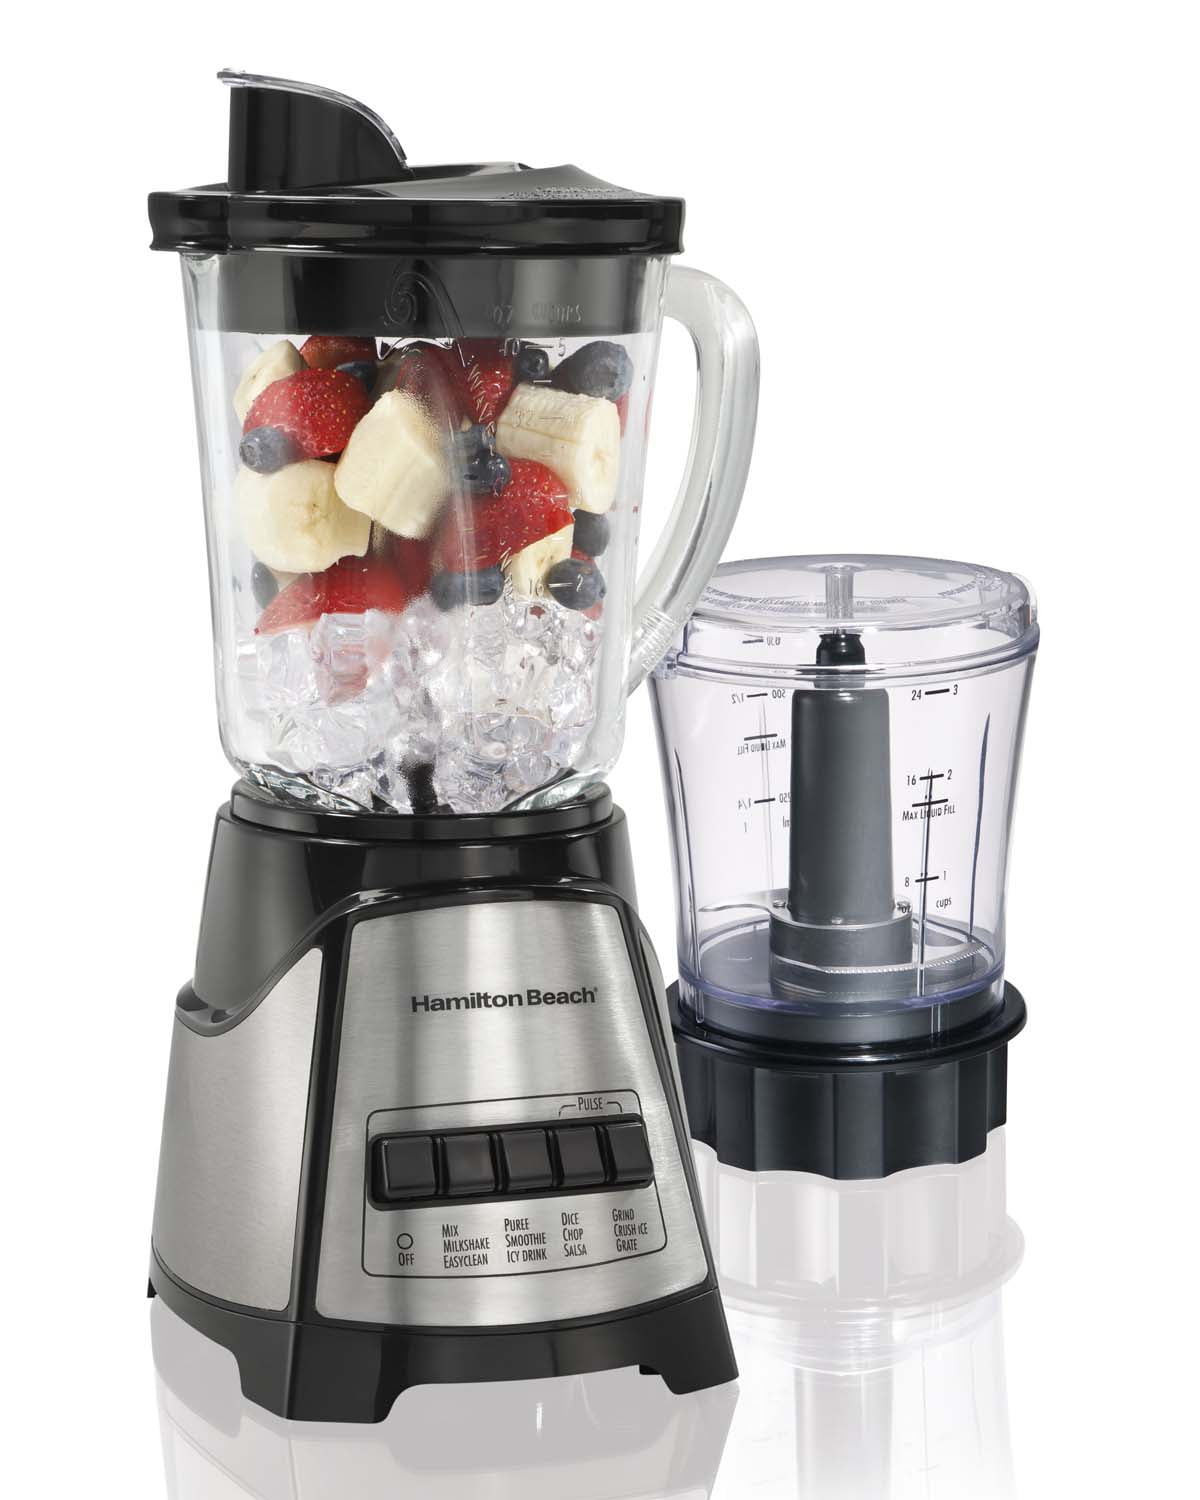 Hamilton Beach Blender for Shakes and Smoothies & Food Processor Combo,  With 40oz Glass Jar, Portable Blend-In Travel Cup & 3 Cup Electric Food